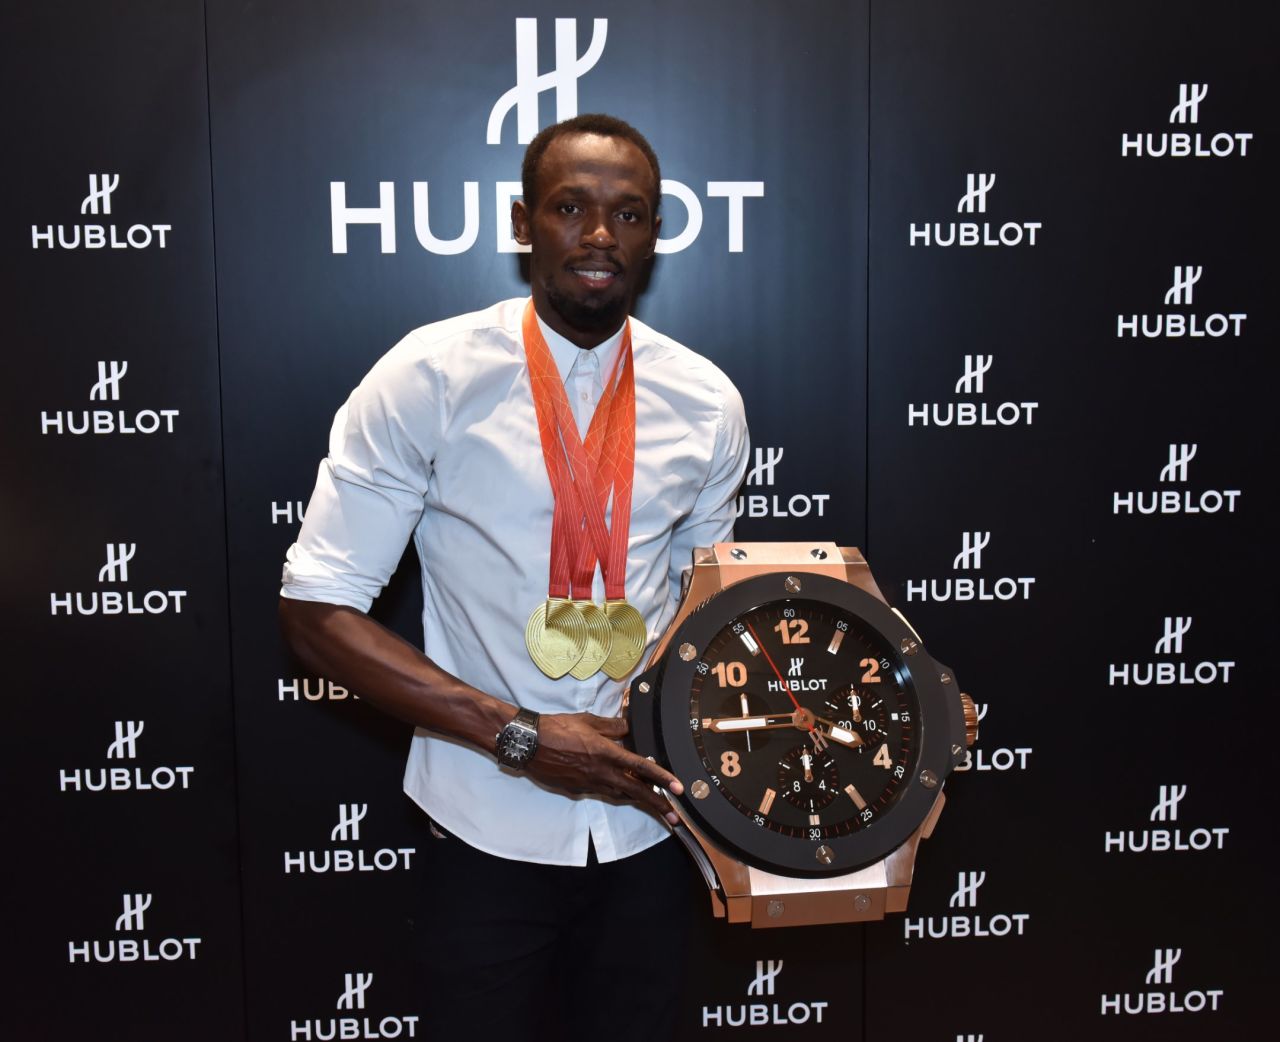 Usain Bolt, the fastest man on earth, says he chose to work with Hublot precisely because the company has a policy of not giving its watches away to celebrities.